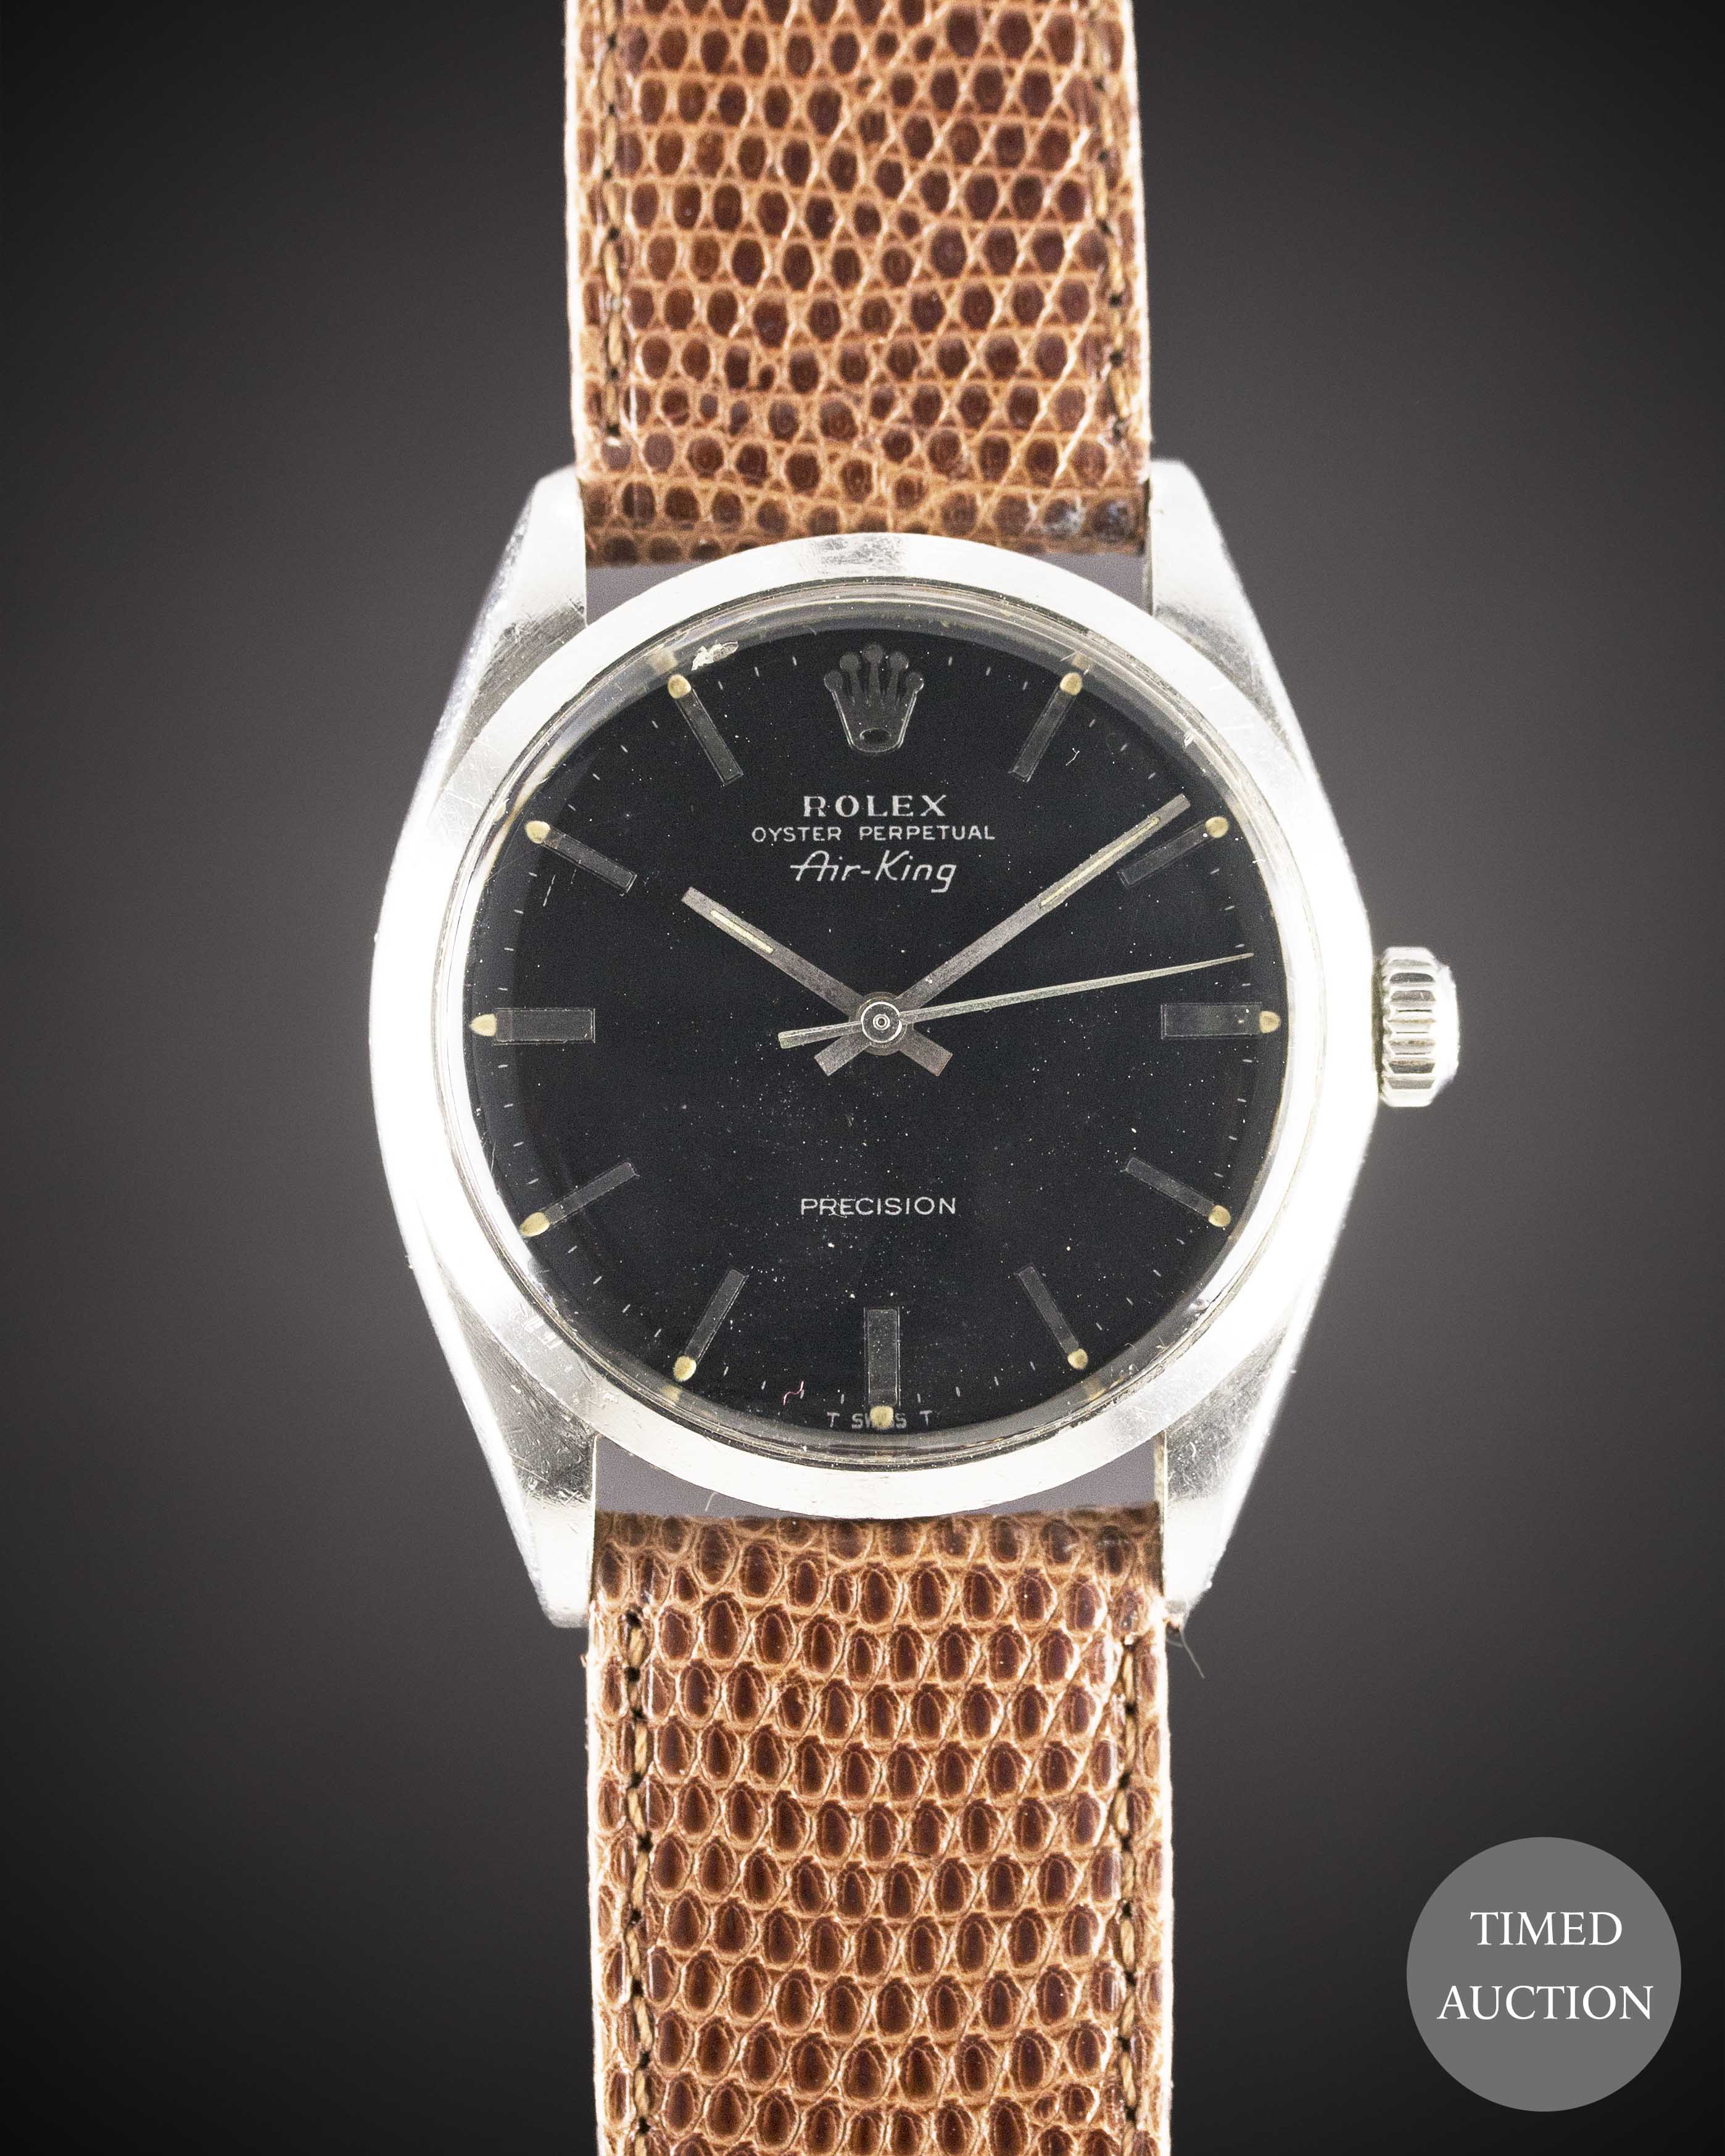 A GENTLEMAN'S STAINLESS STEEL ROLEX OYSTER PERPETUAL AIR KING PRECISION WRIST WATCH CIRCA 1965, REF.